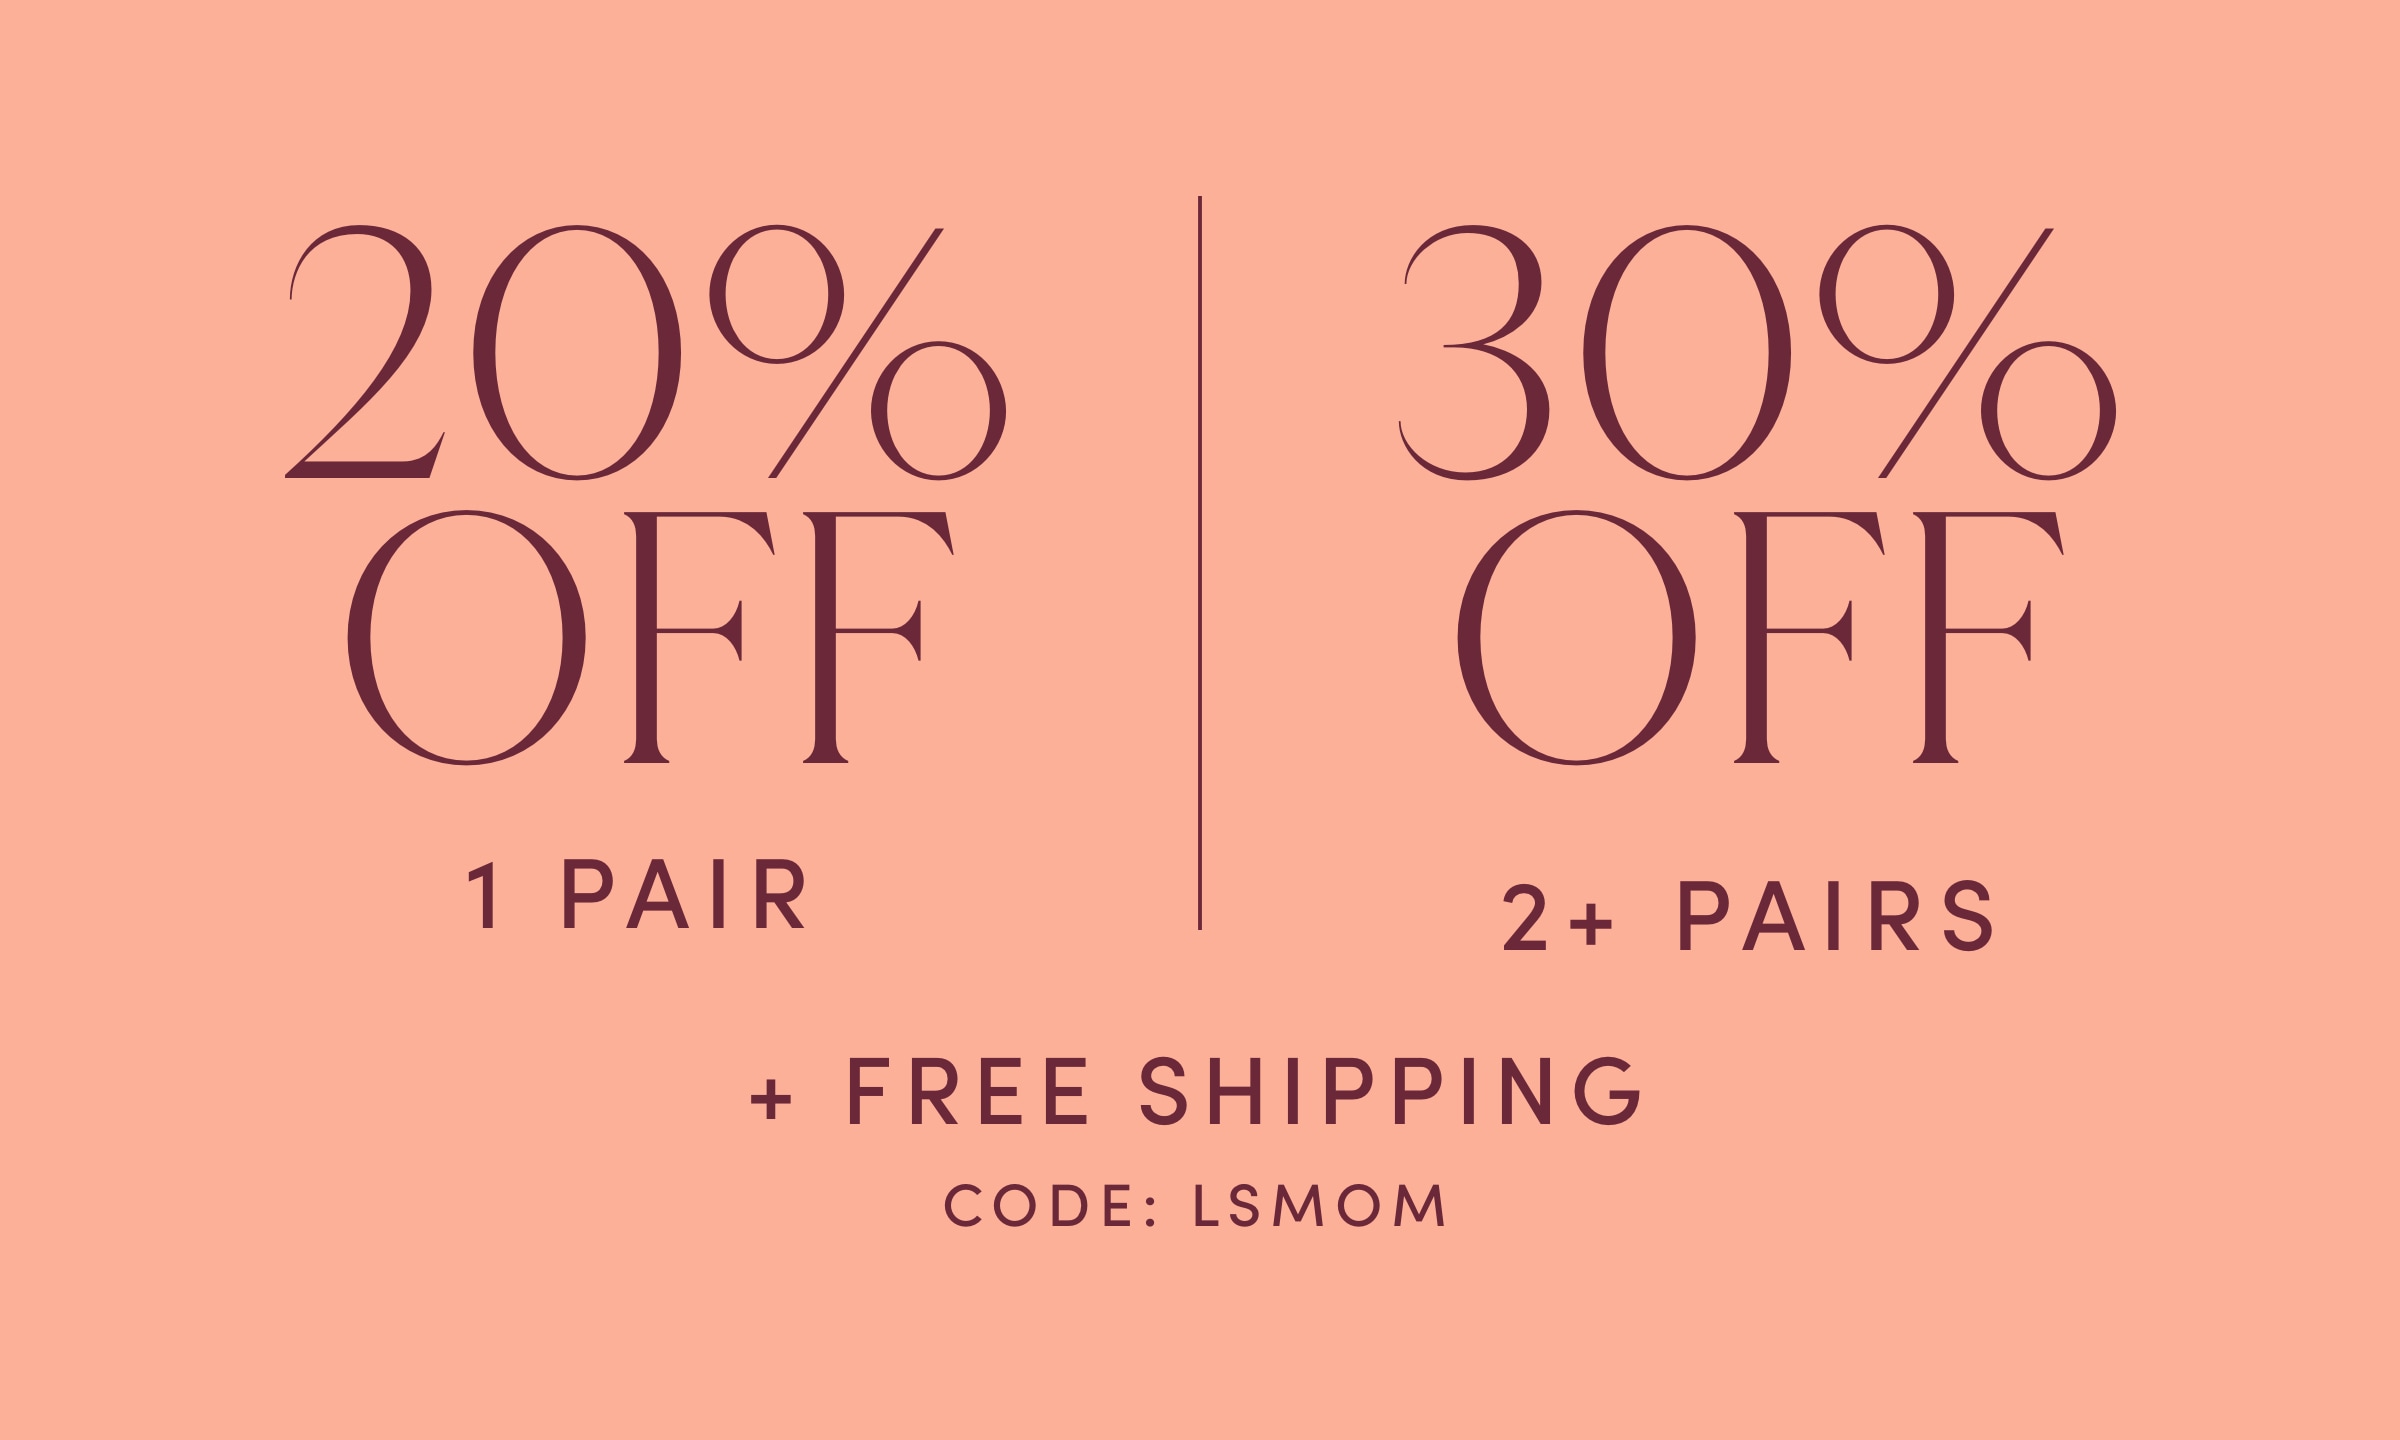 20% off 1 Pair / 30% Off 2+ Pairs with Free Shipping - Code: LSMOM